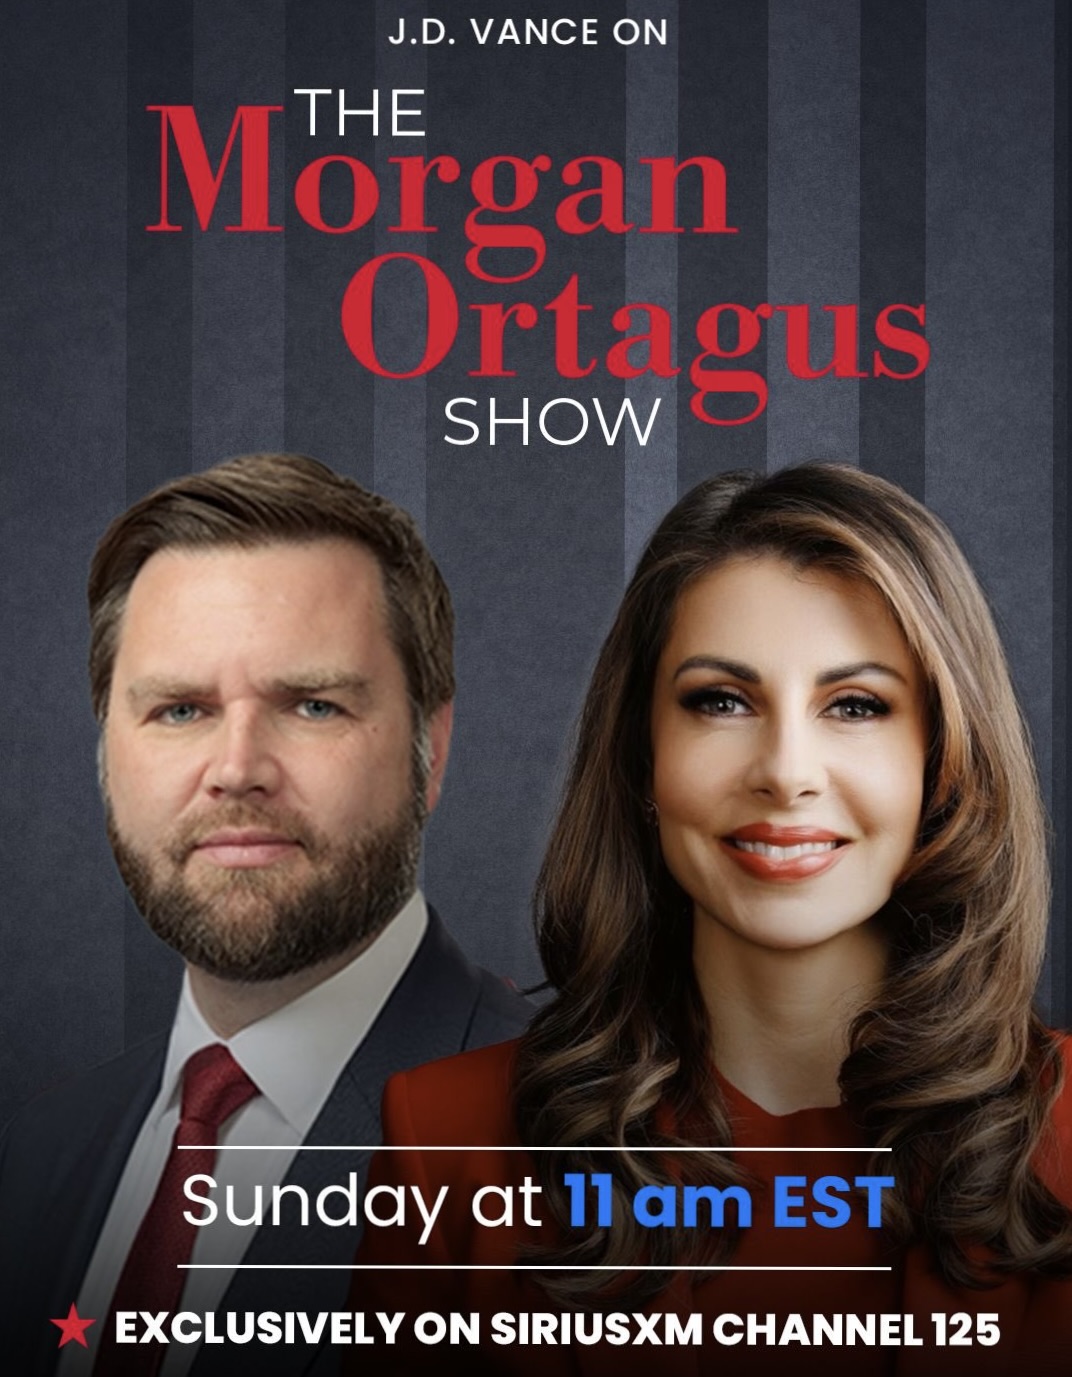 The Morgan Ortagus Show with Special Guest Vice Presidential Nominee Senator J.D. Vance